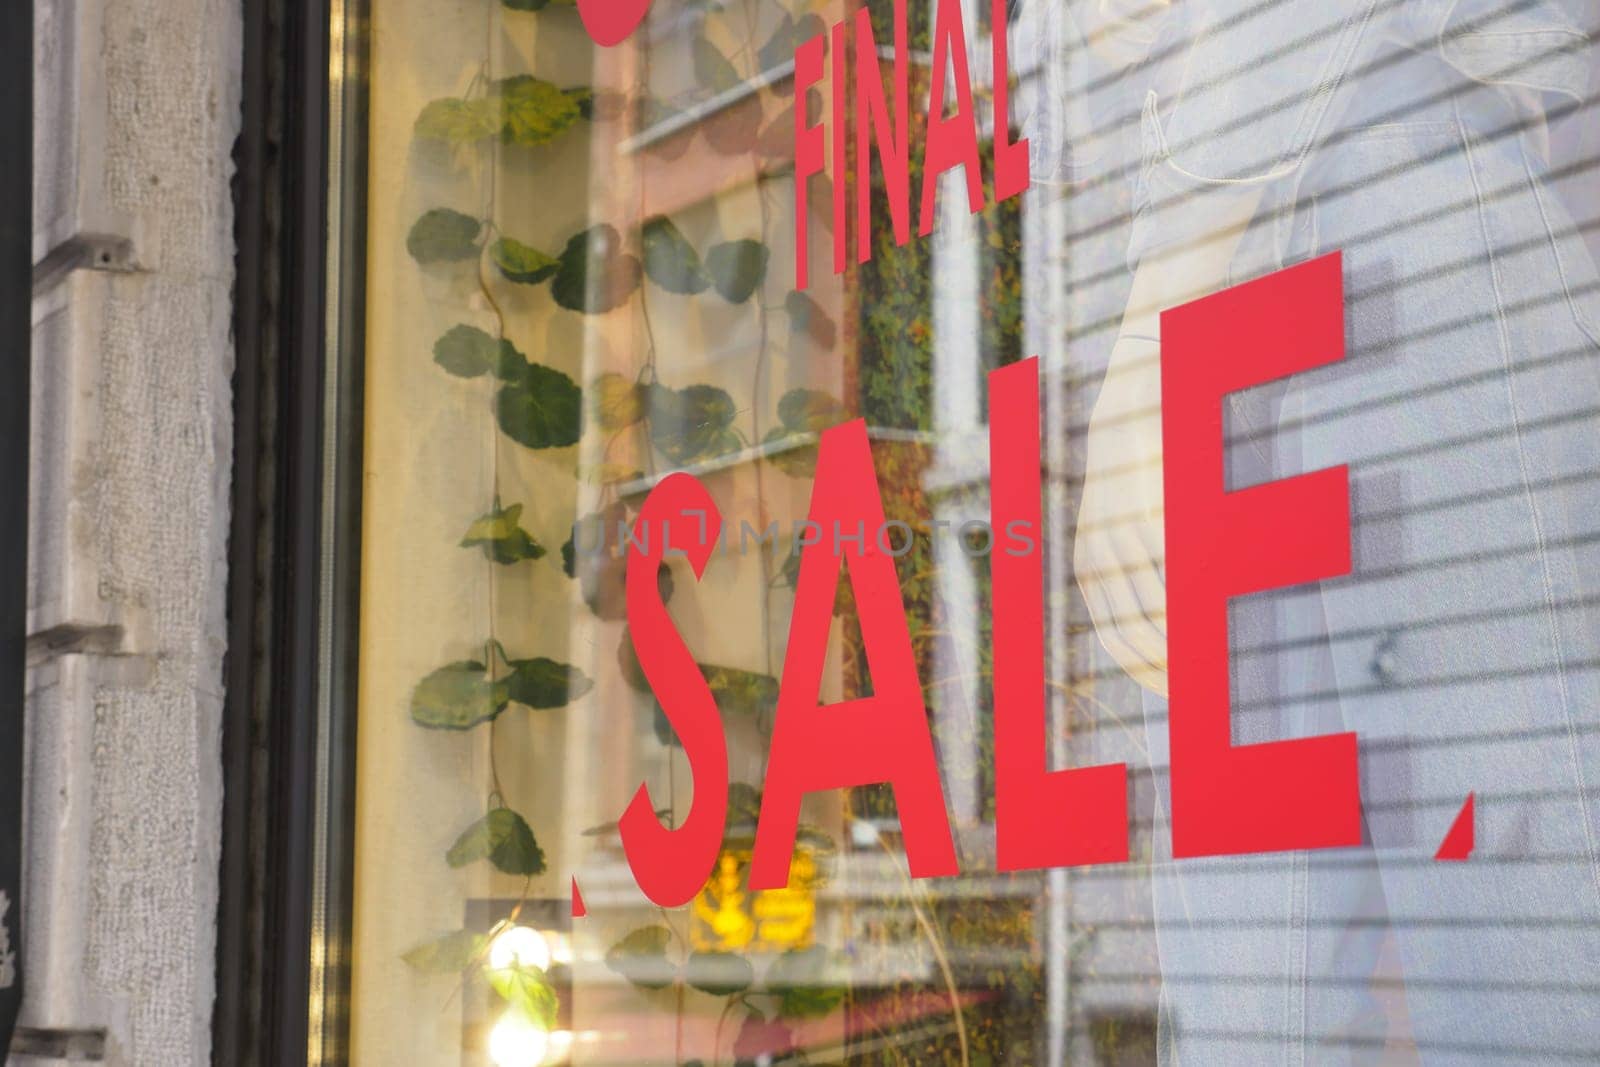 Large red Sale text letters on red background on clothing store